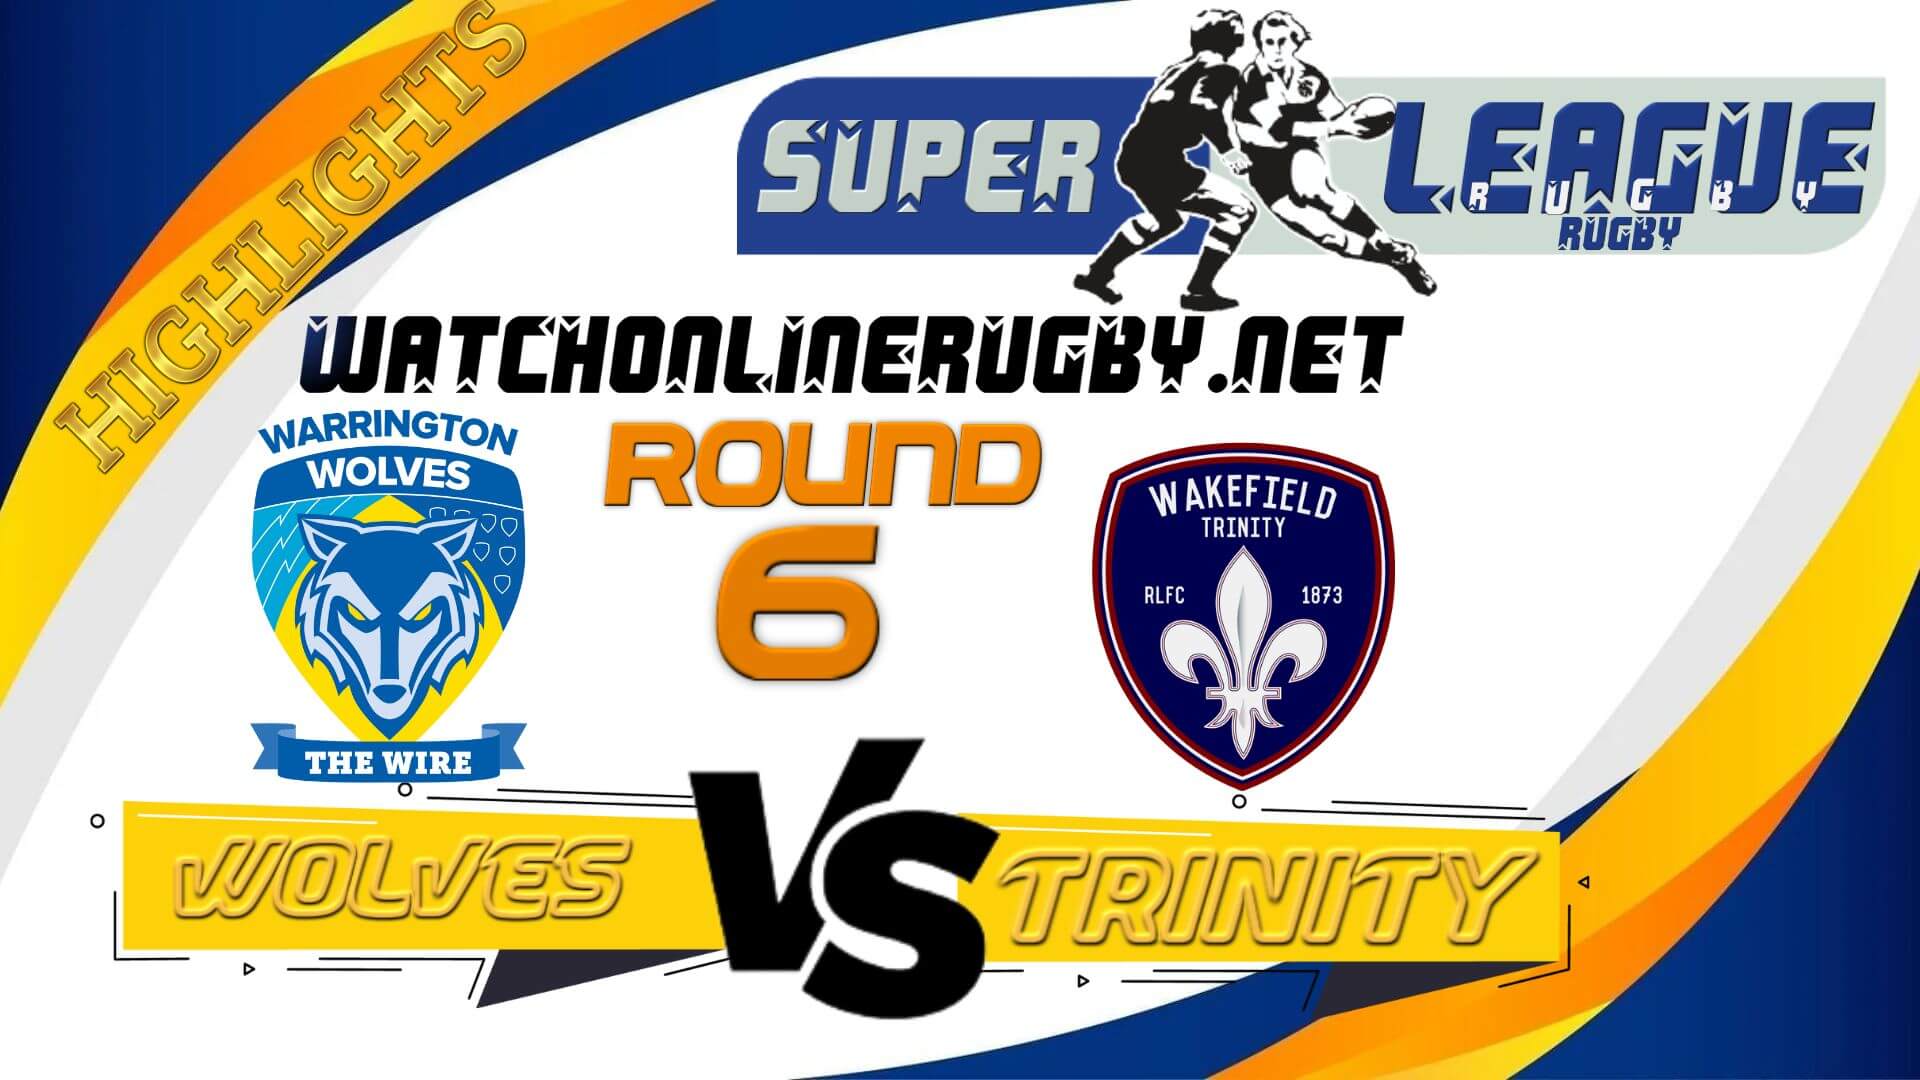 Warrington Wolves Vs Wakefield Trinity Super League Rugby 2022 RD 6